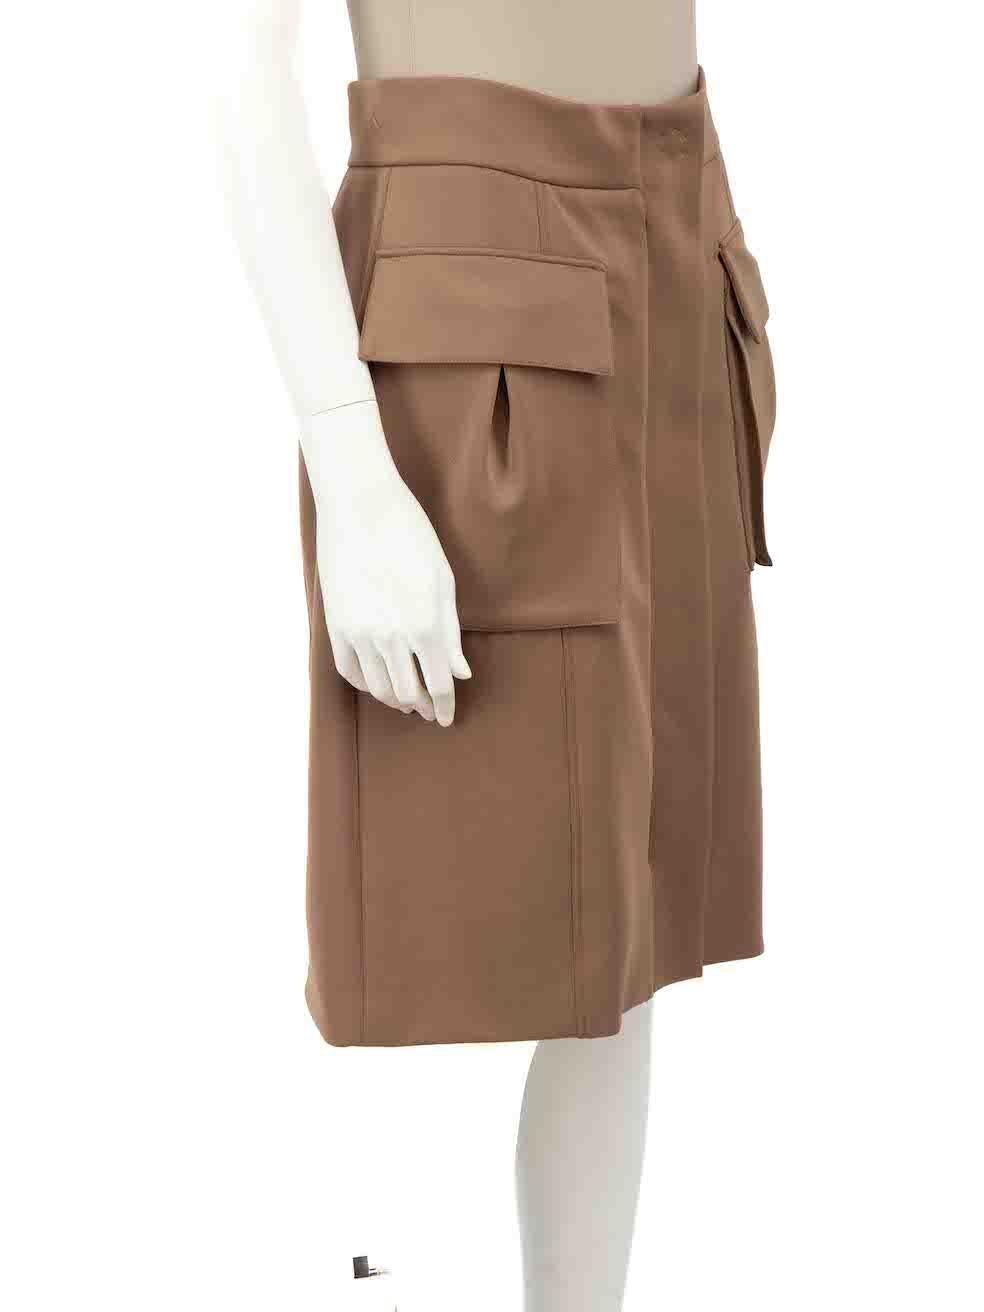 CONDITION is Very good. Minimal wear to skirt is evident. Minimal wear to the waistband with a small pluck to the weave on this used Bottega Veneta designer resale item.
 
 
 
 Details
 
 
 Camel
 
 Polyester
 
 Pencil skirt
 
 Figure hugging fit
 
